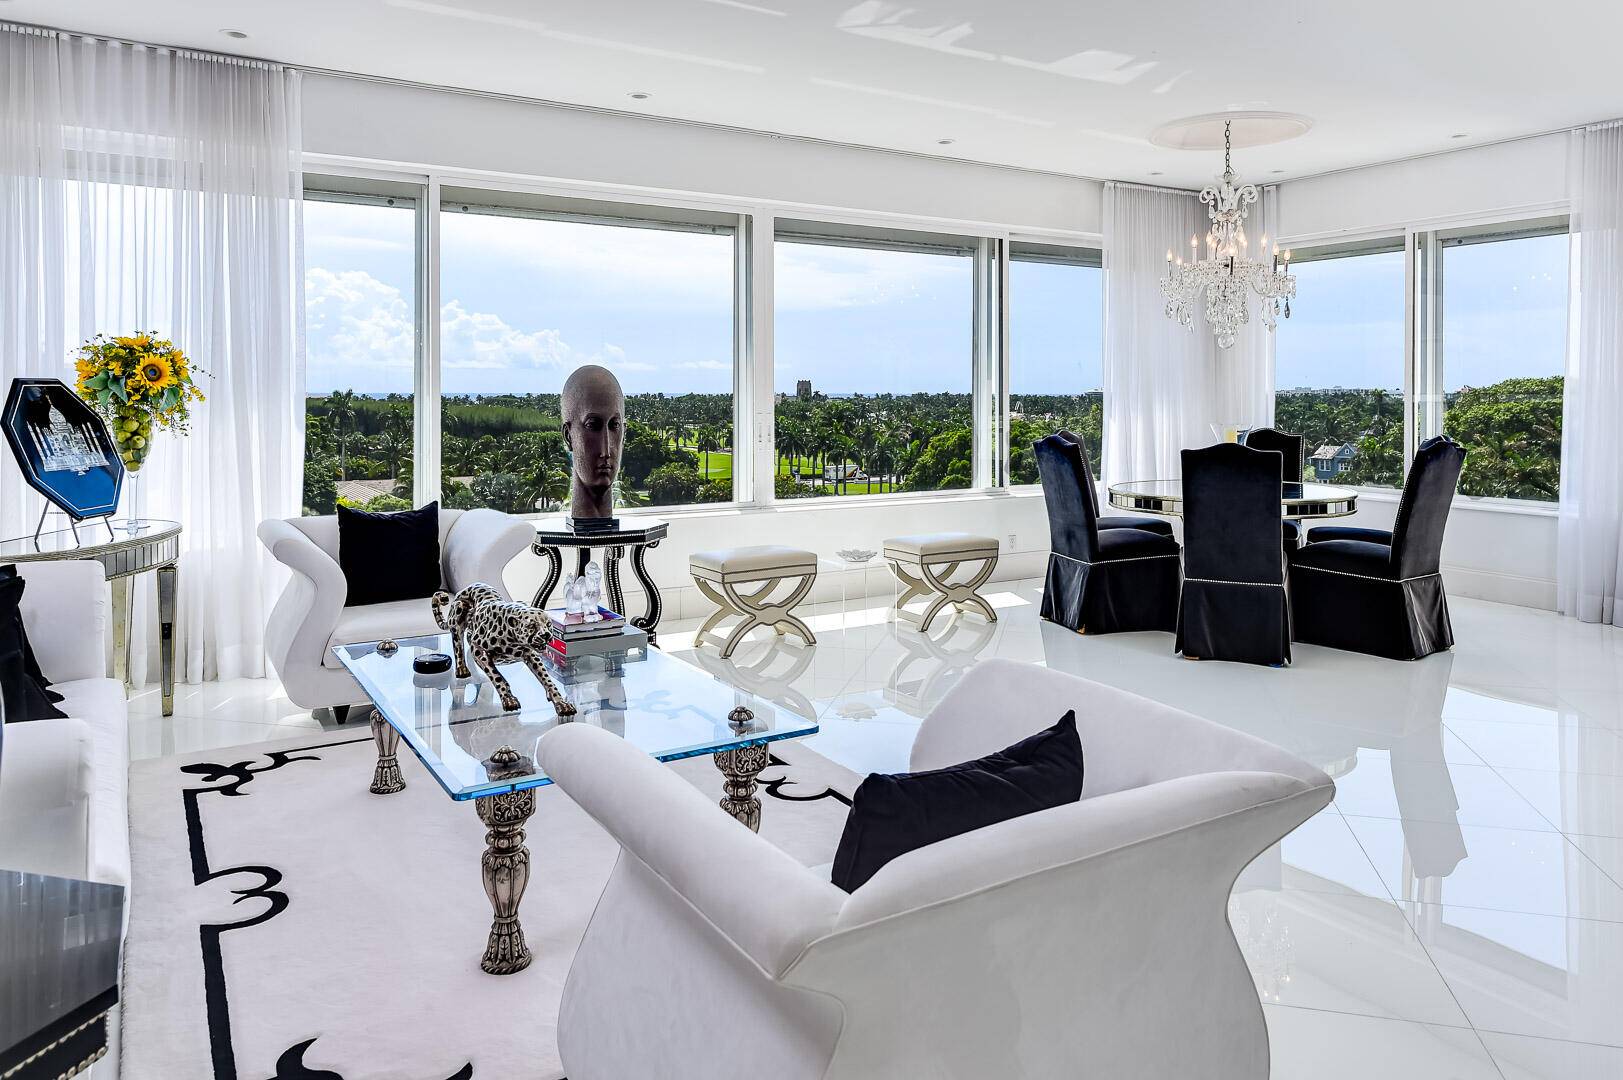 Prime In Town Offering. Glamorous 2 bedroom, 2 bath Penthouse with an expansive outdoor rooftop boasting breathtaking Ocean to Intracoastal views.